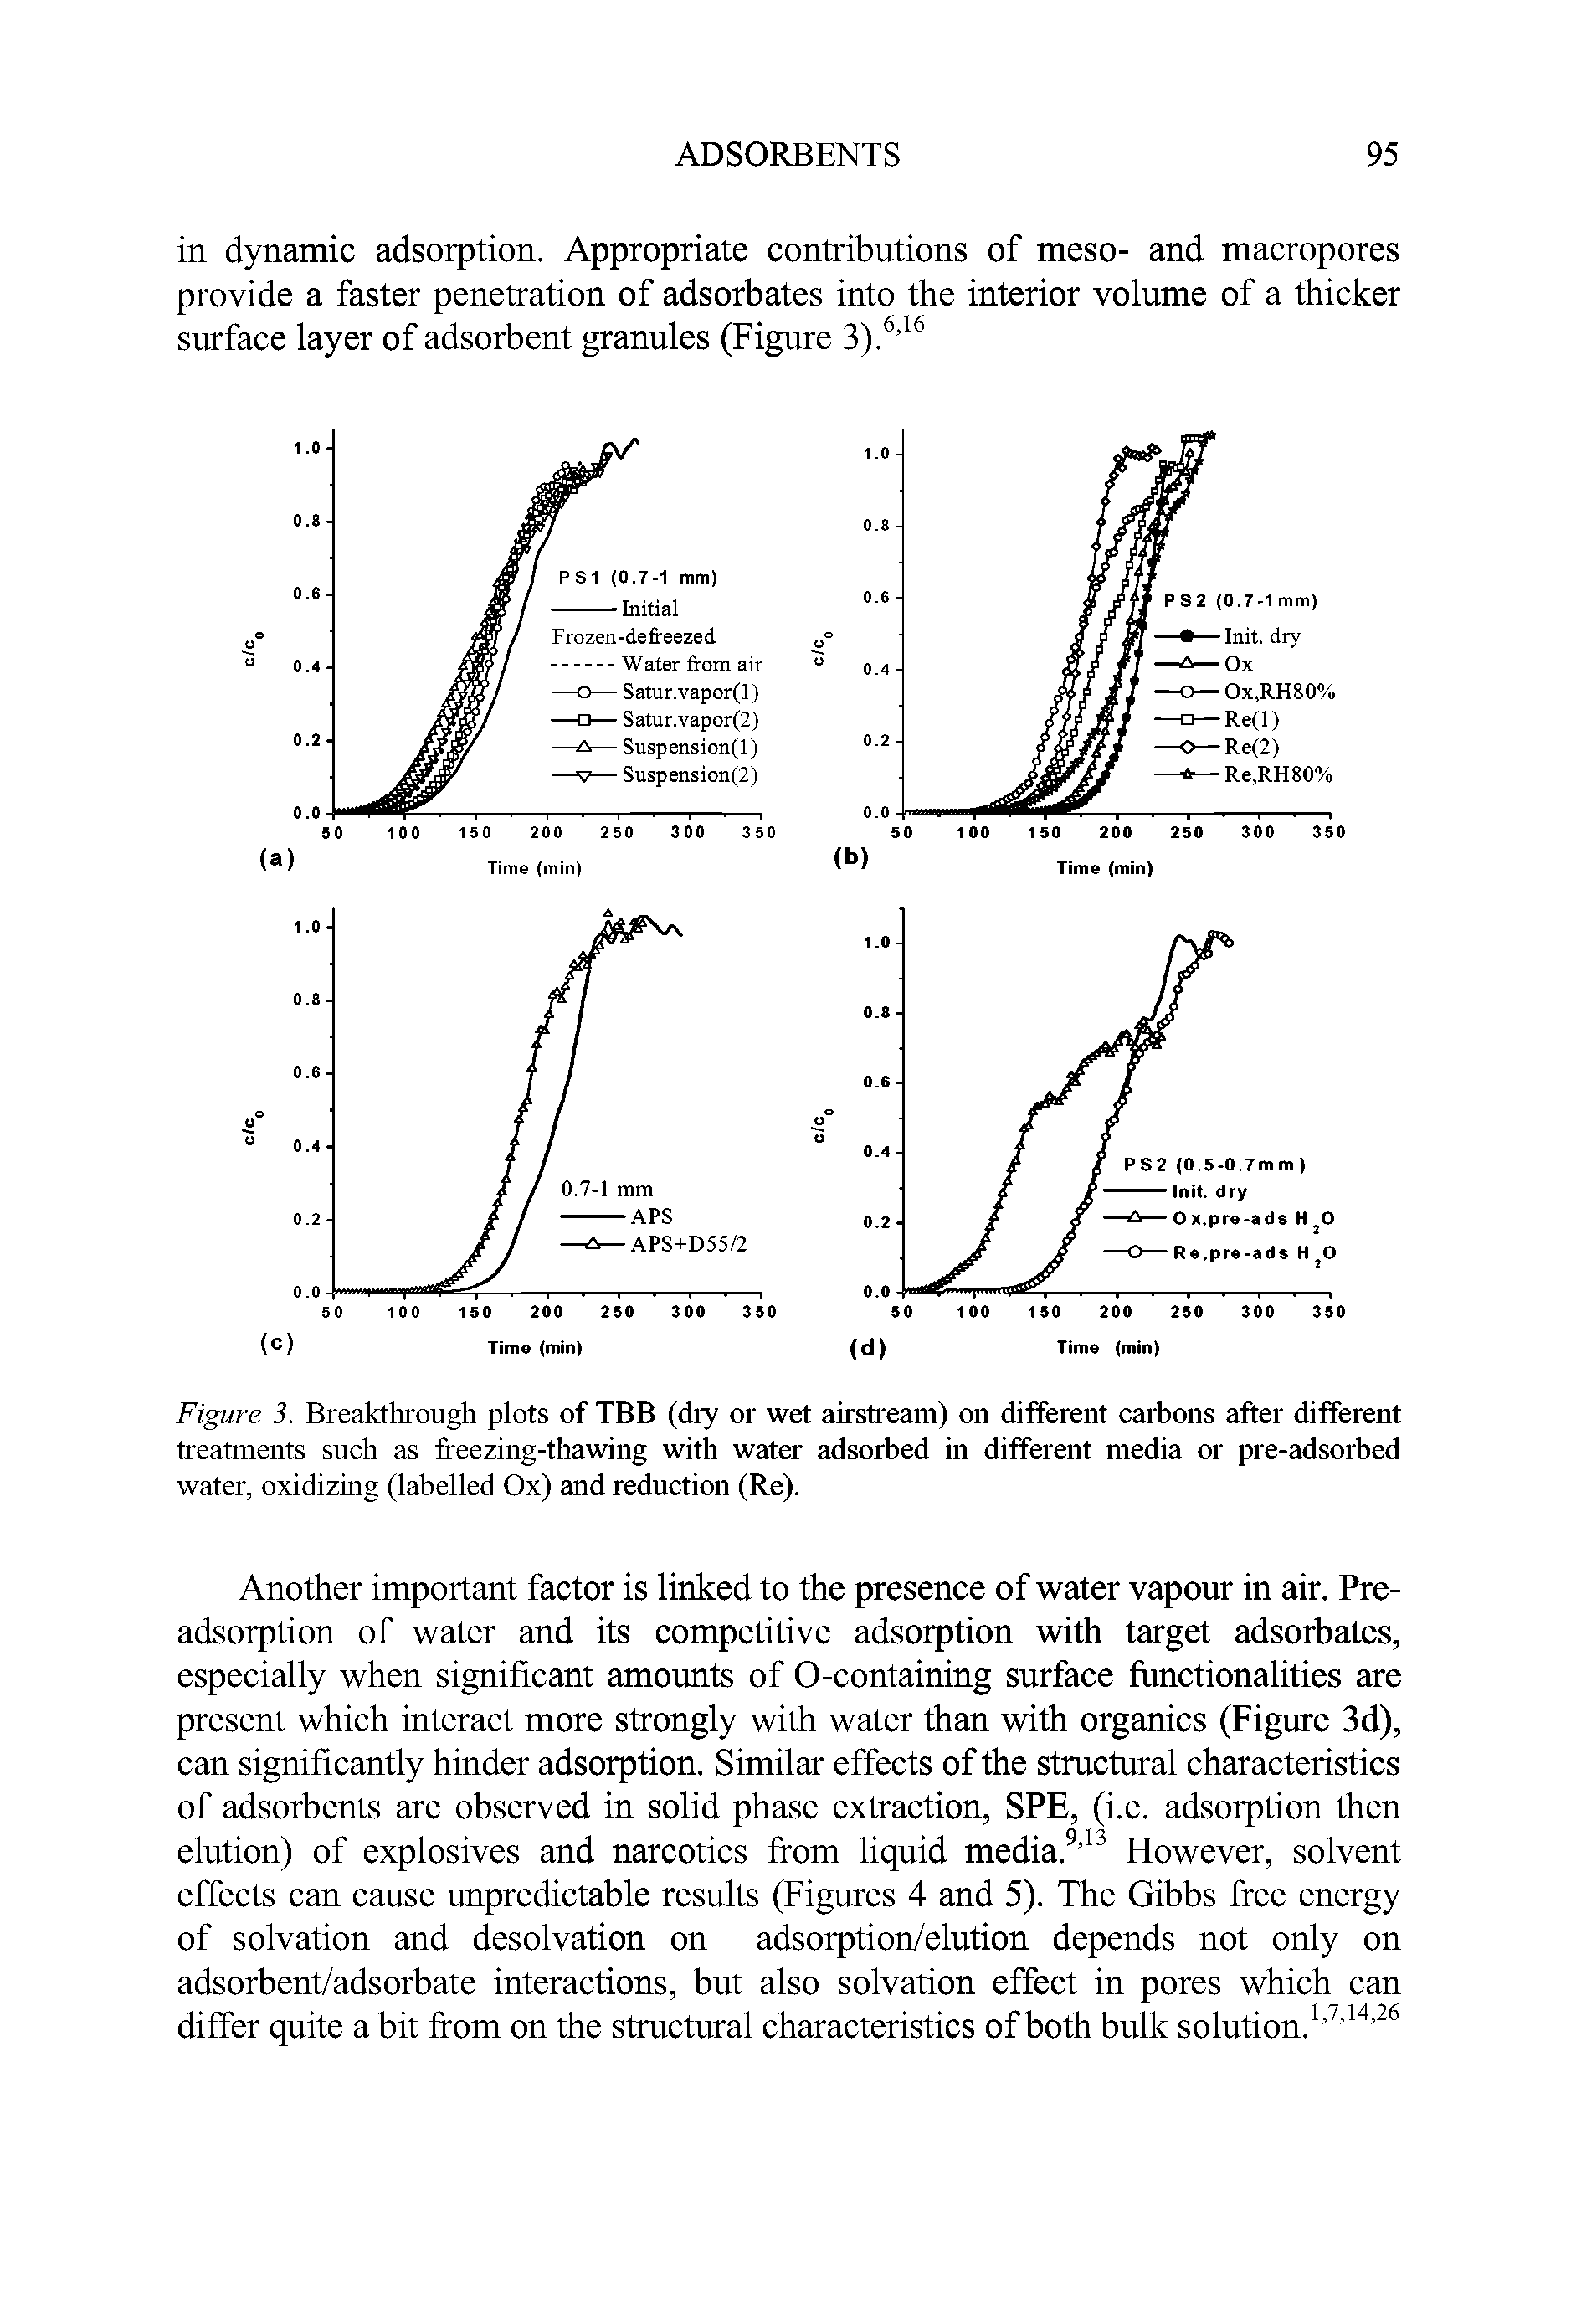 Figure 3. Breakthrough plots of TBB (dry or wet airstream) on different carbons after different treatments such as freezing-thawing with water adsorbed in different media or pre-adsorbed water, oxidizing (labelled Ox) and reduction (Re).